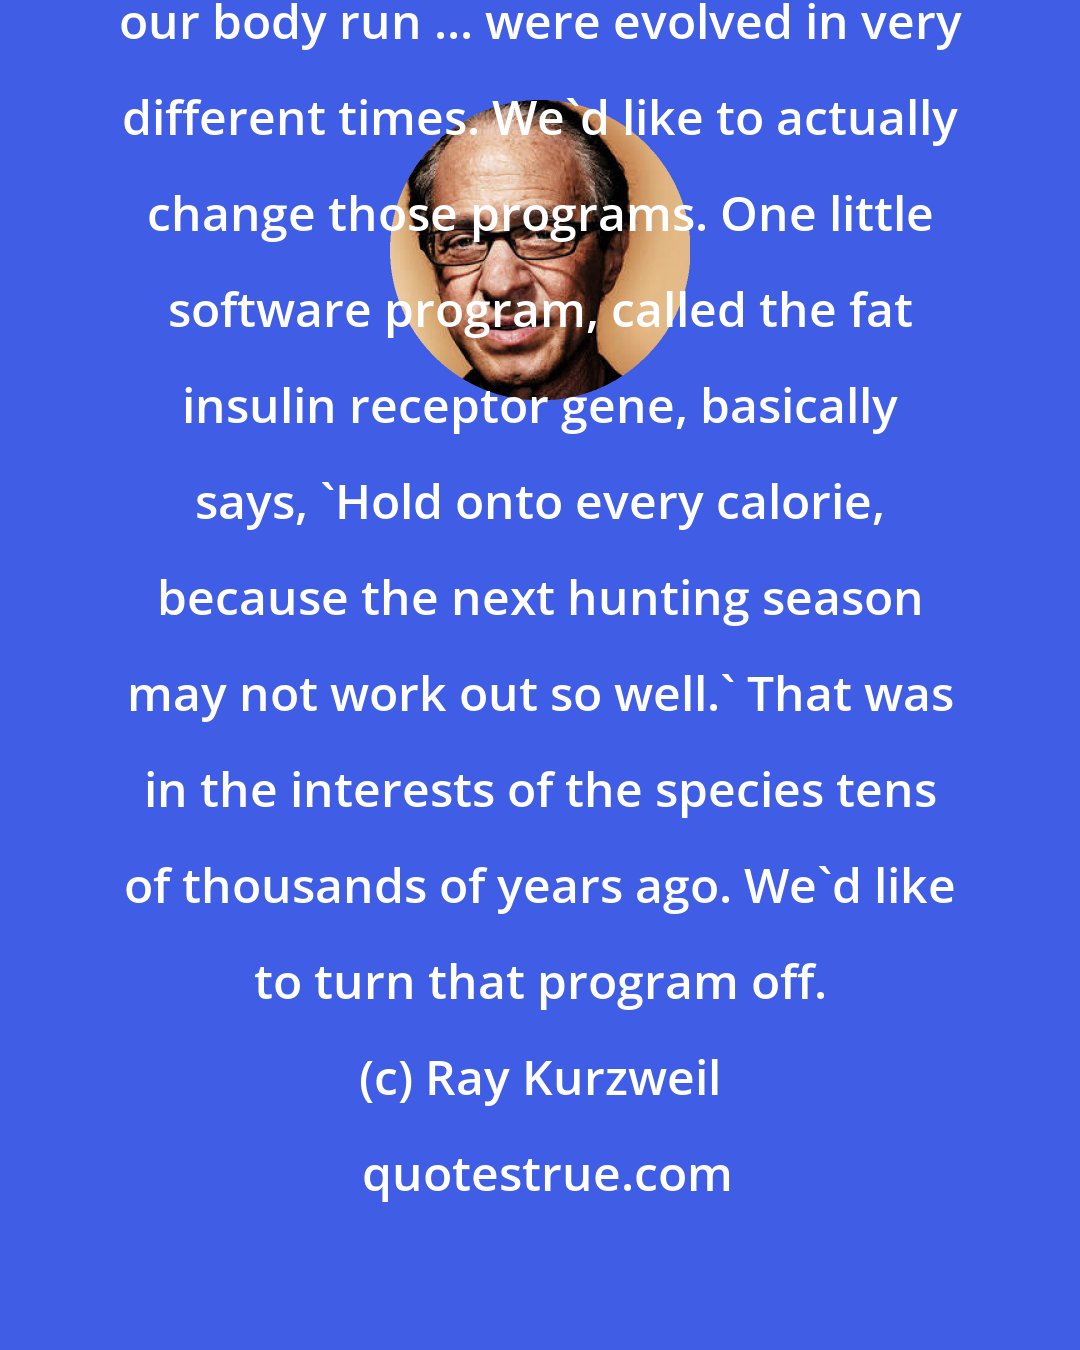 Ray Kurzweil: The software programs that make our body run ... were evolved in very different times. We'd like to actually change those programs. One little software program, called the fat insulin receptor gene, basically says, 'Hold onto every calorie, because the next hunting season may not work out so well.' That was in the interests of the species tens of thousands of years ago. We'd like to turn that program off.